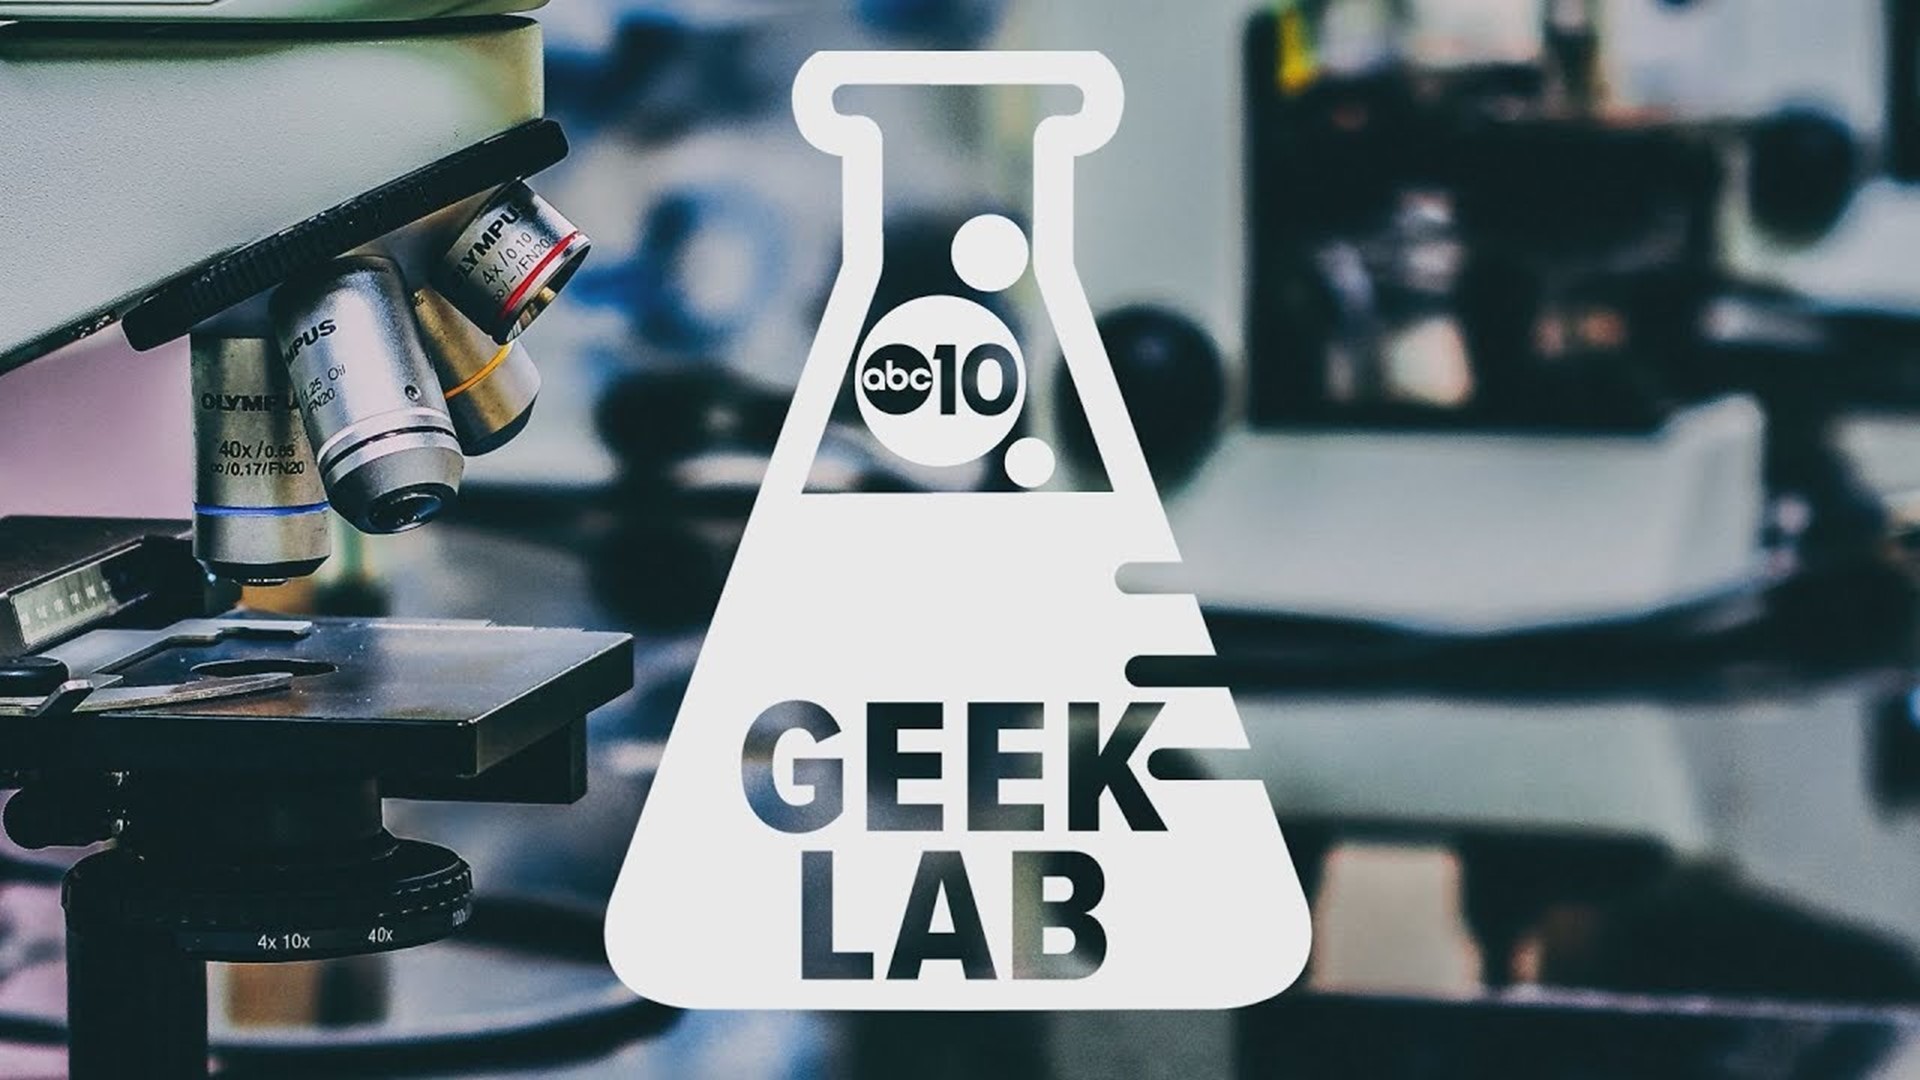 It's time for Geek Lab, where we spend a little more time geeking out about the weather, the climate and all things science.